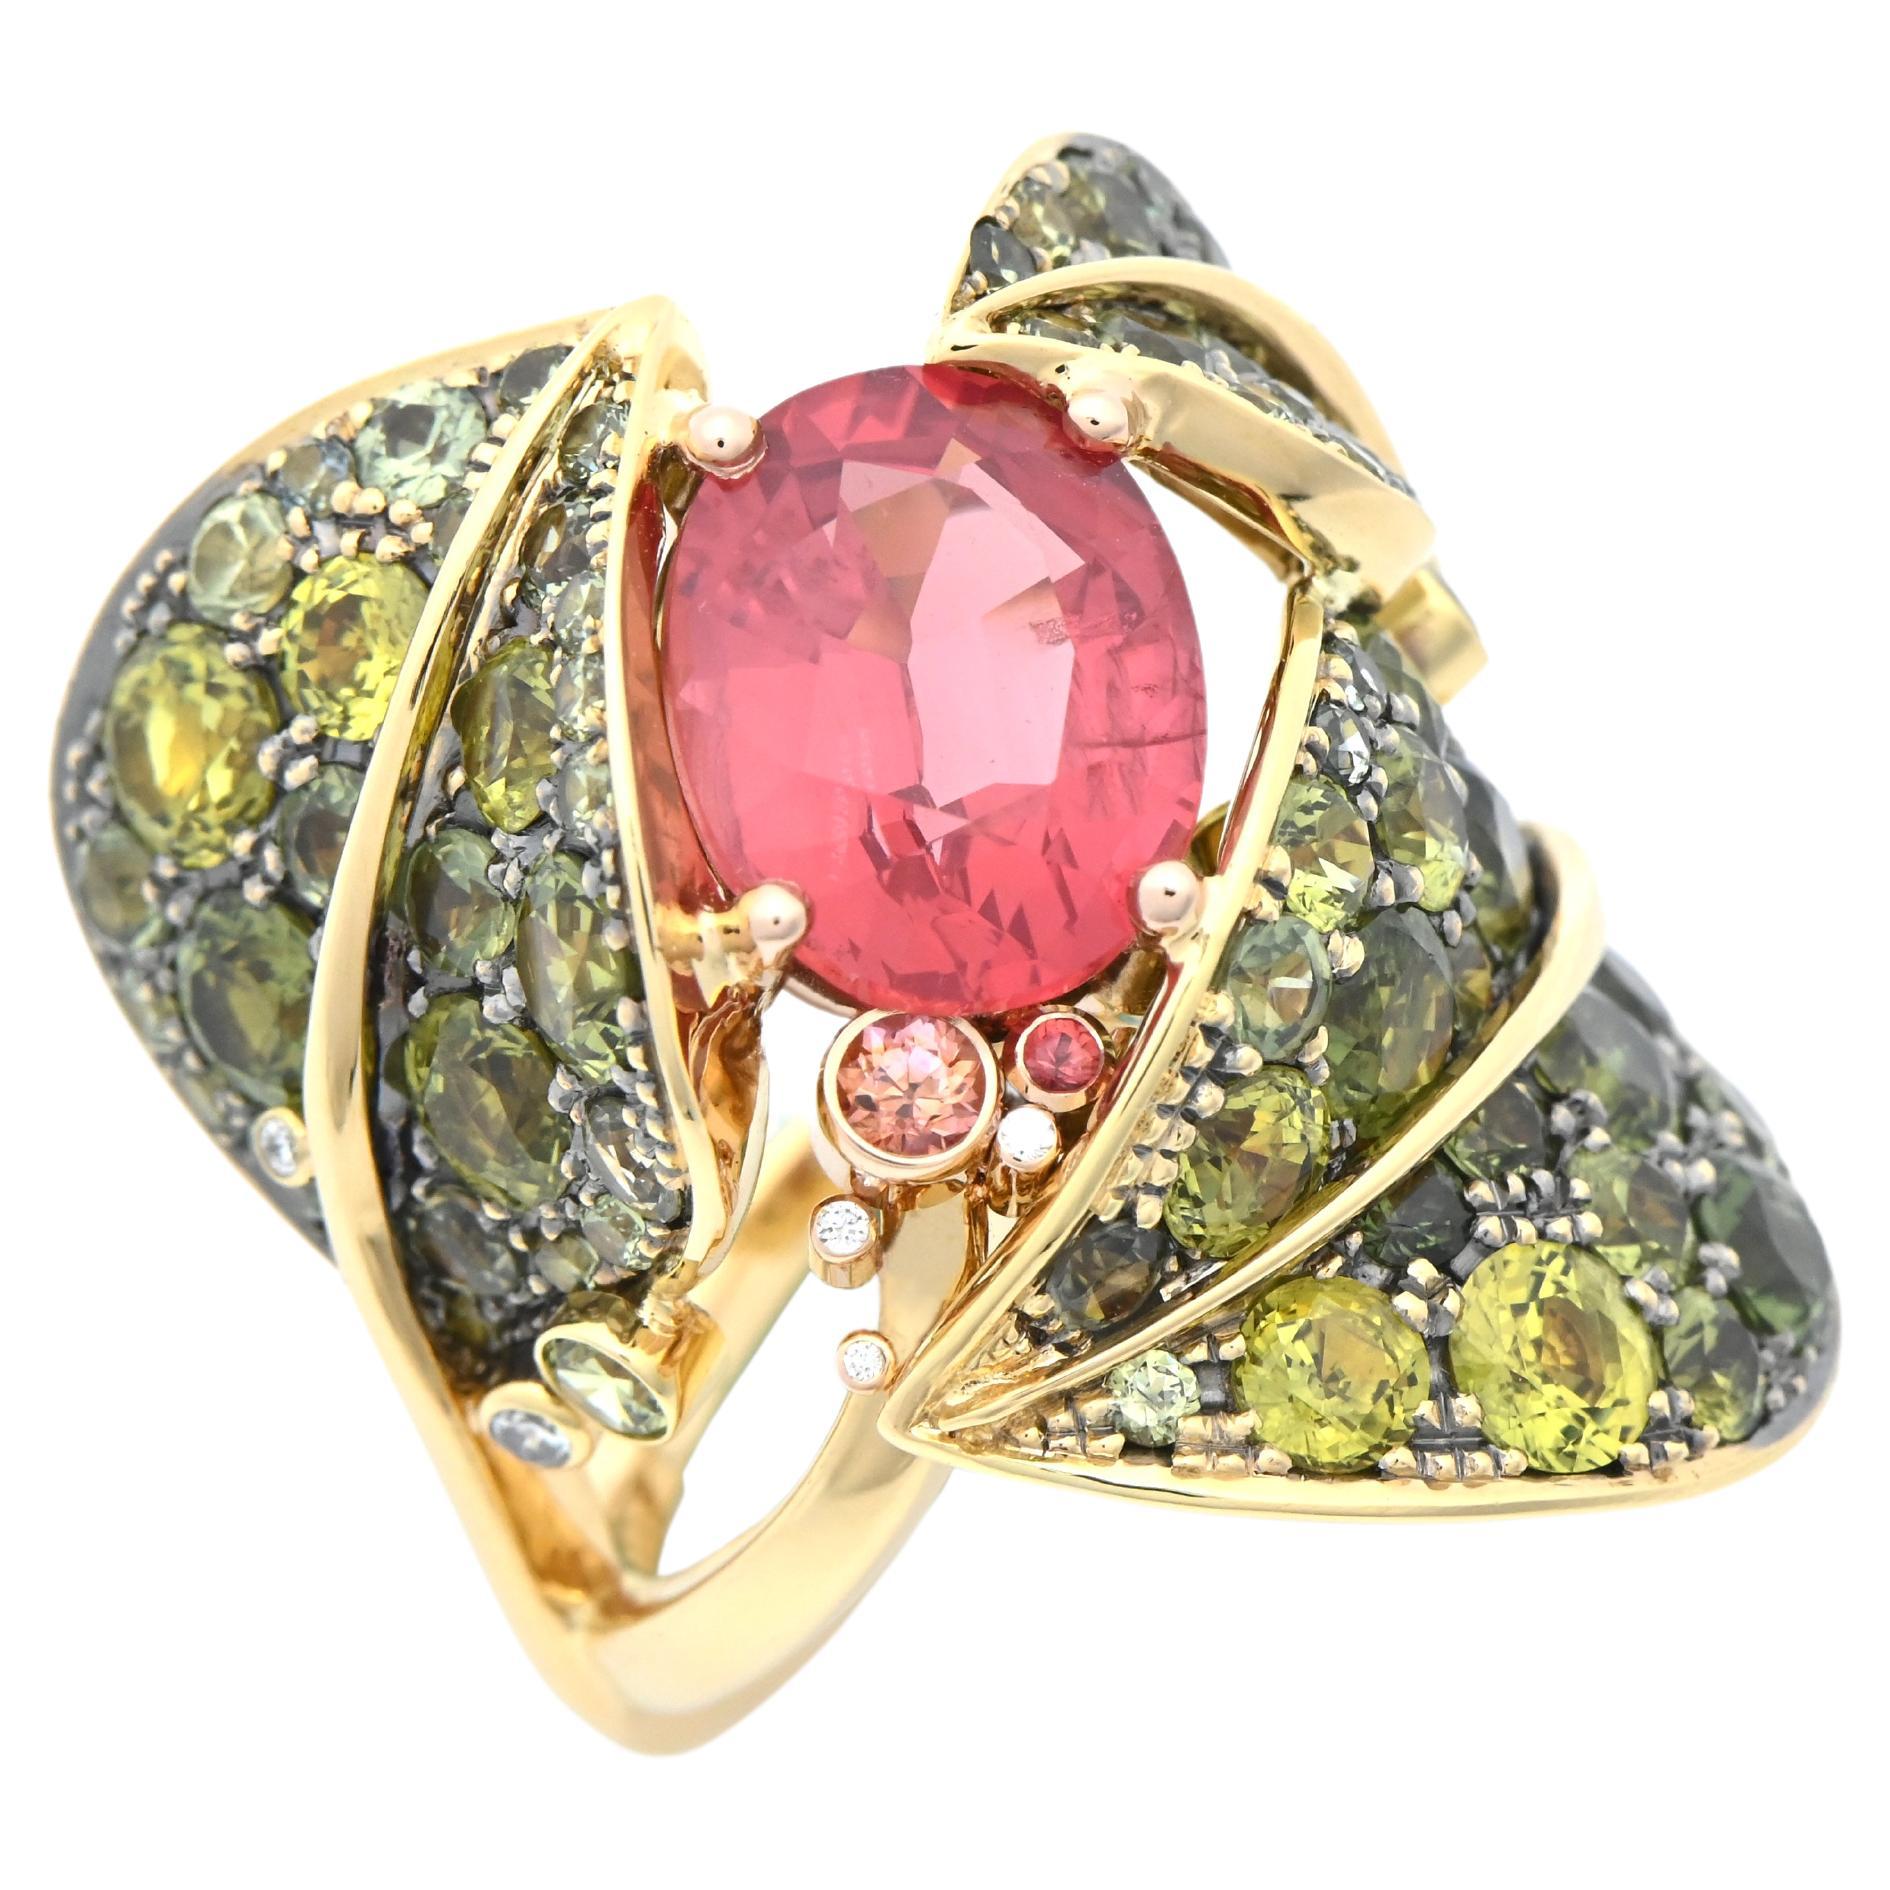 "Hibiscus" High Jewelery Ring. (spinel 4.65cts) For Sale